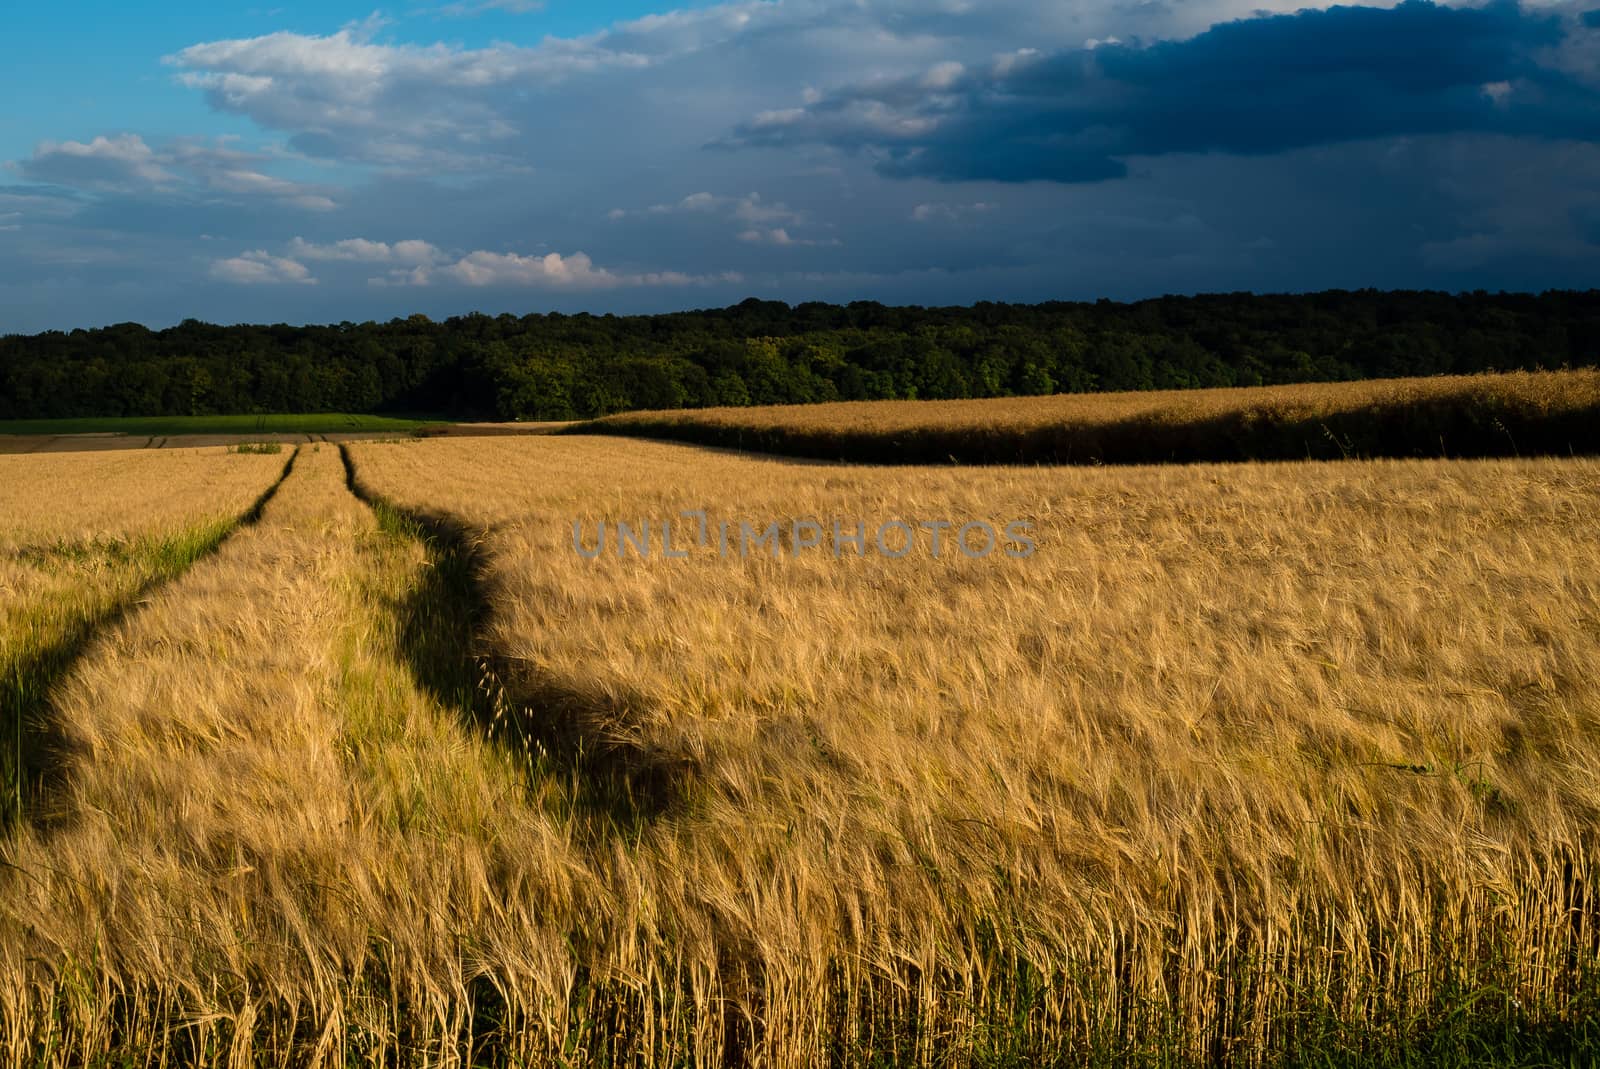 A storm at sunset over wheat crops